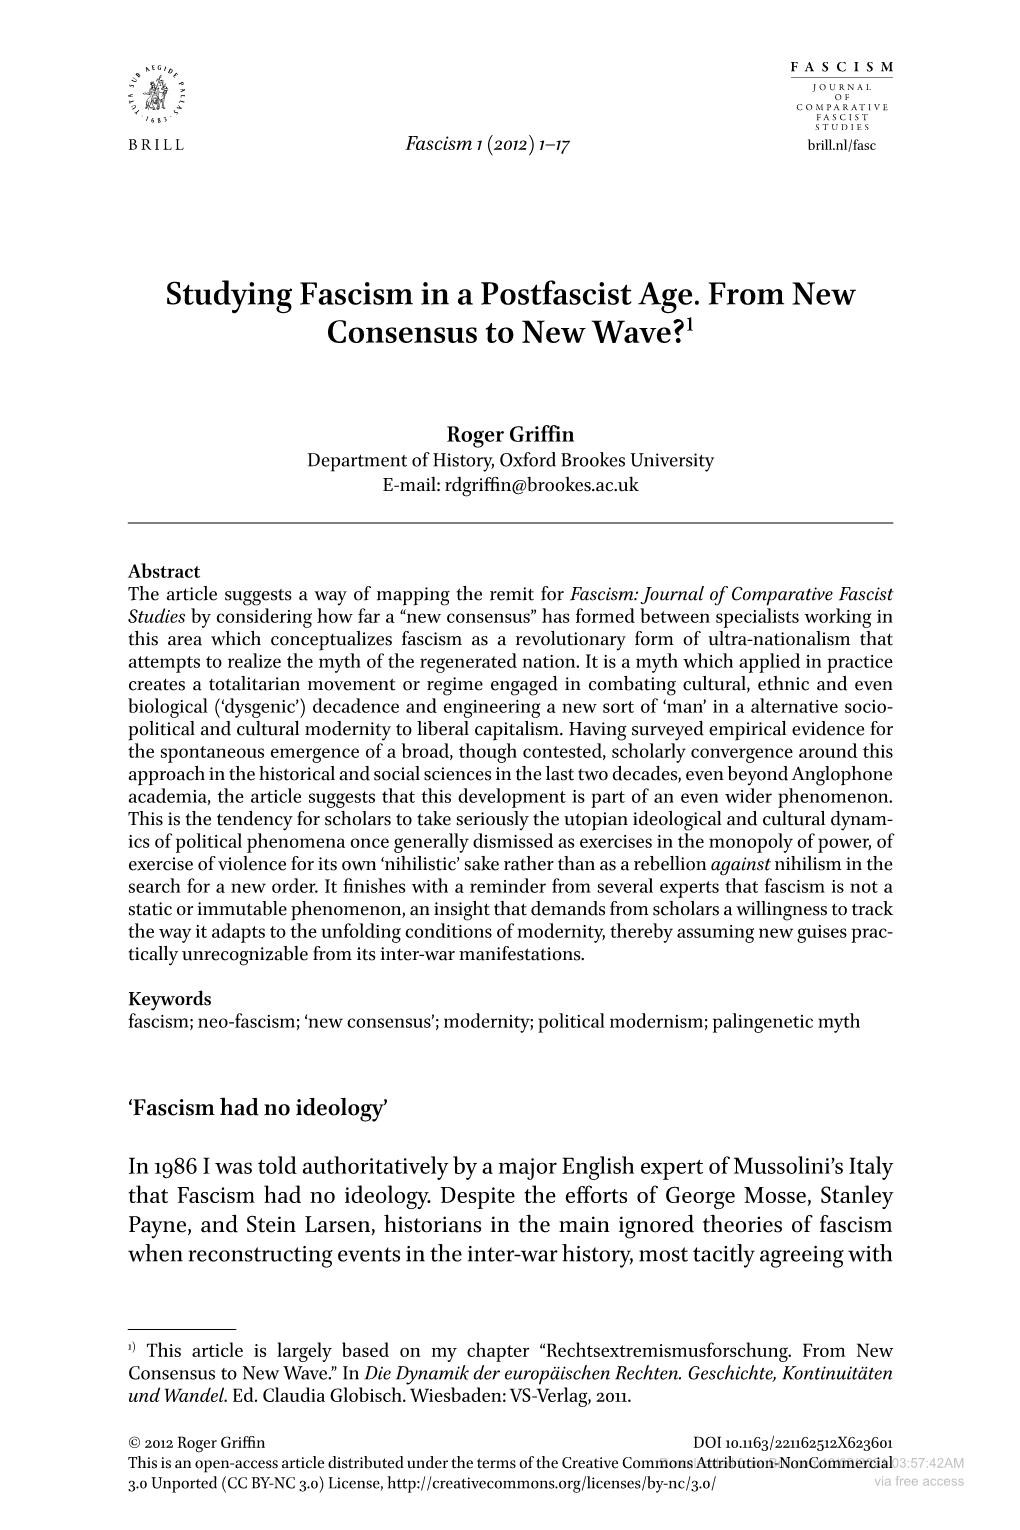 Studying Fascism in a Postfascist Age. from New Consensus to New Wave?1